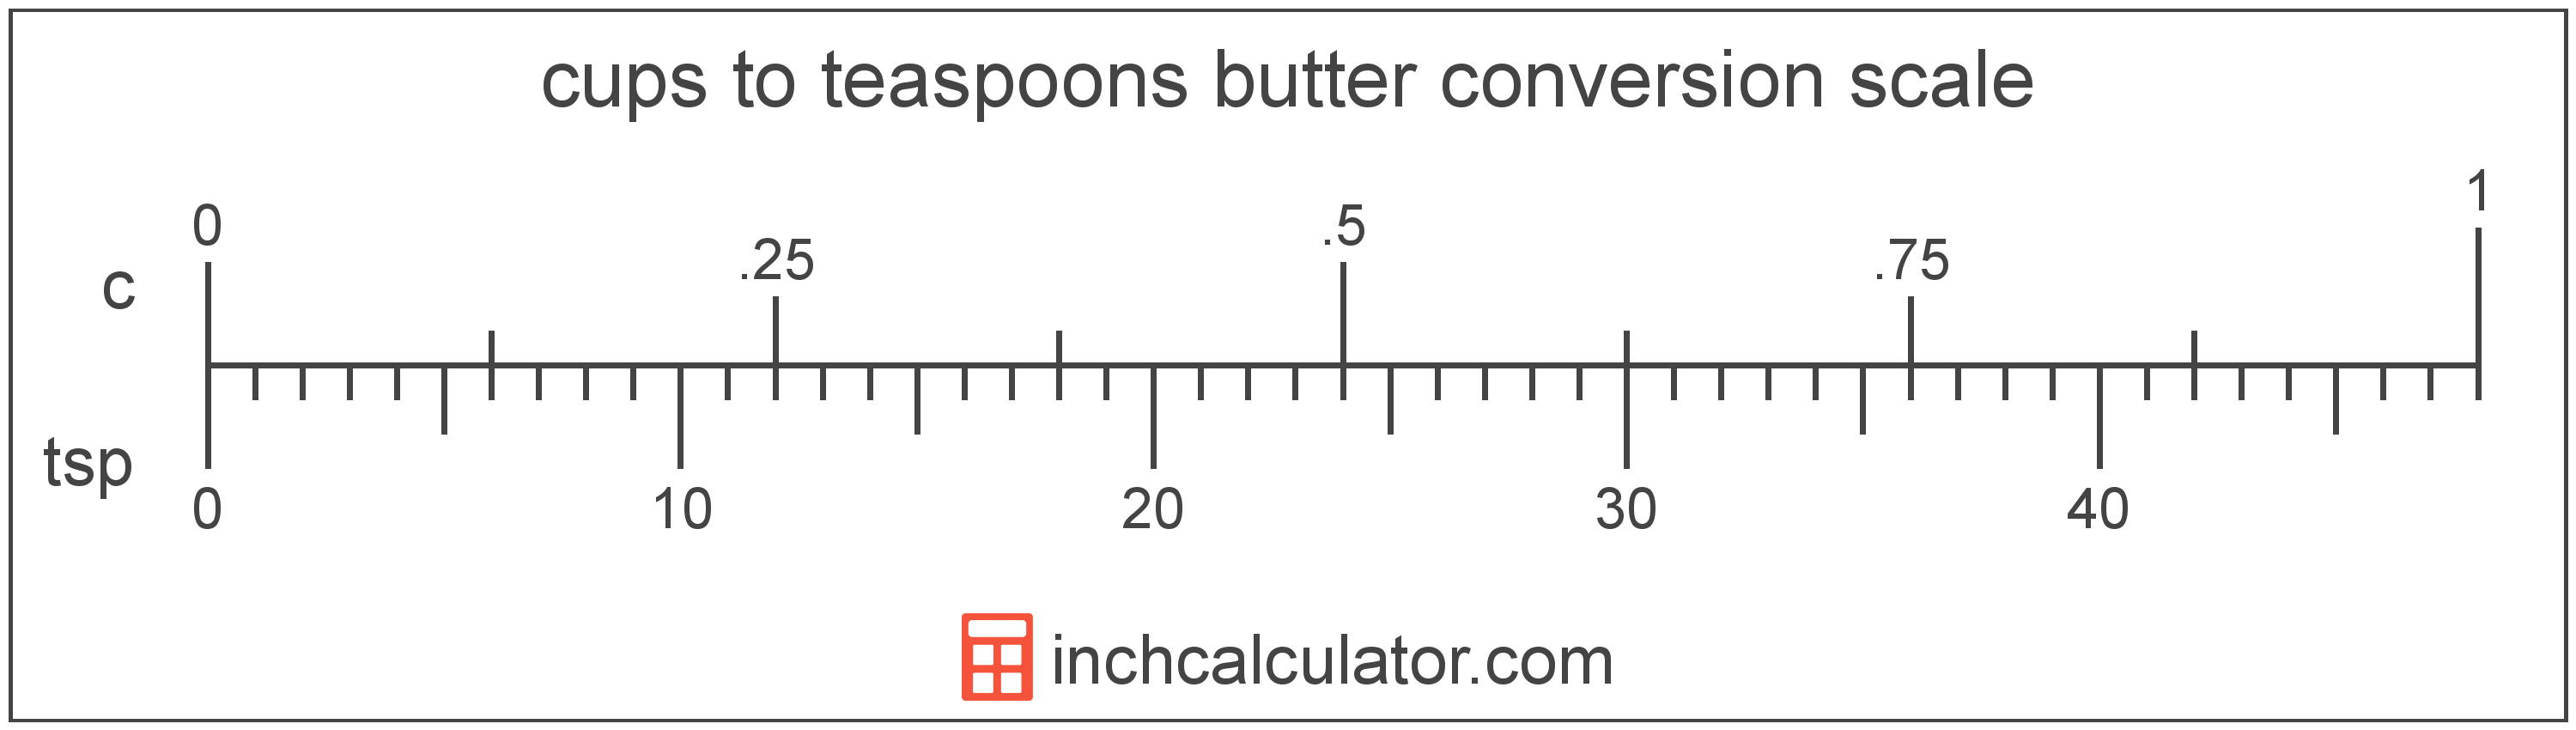 conversion scale showing teaspoons and equivalent cups butter values